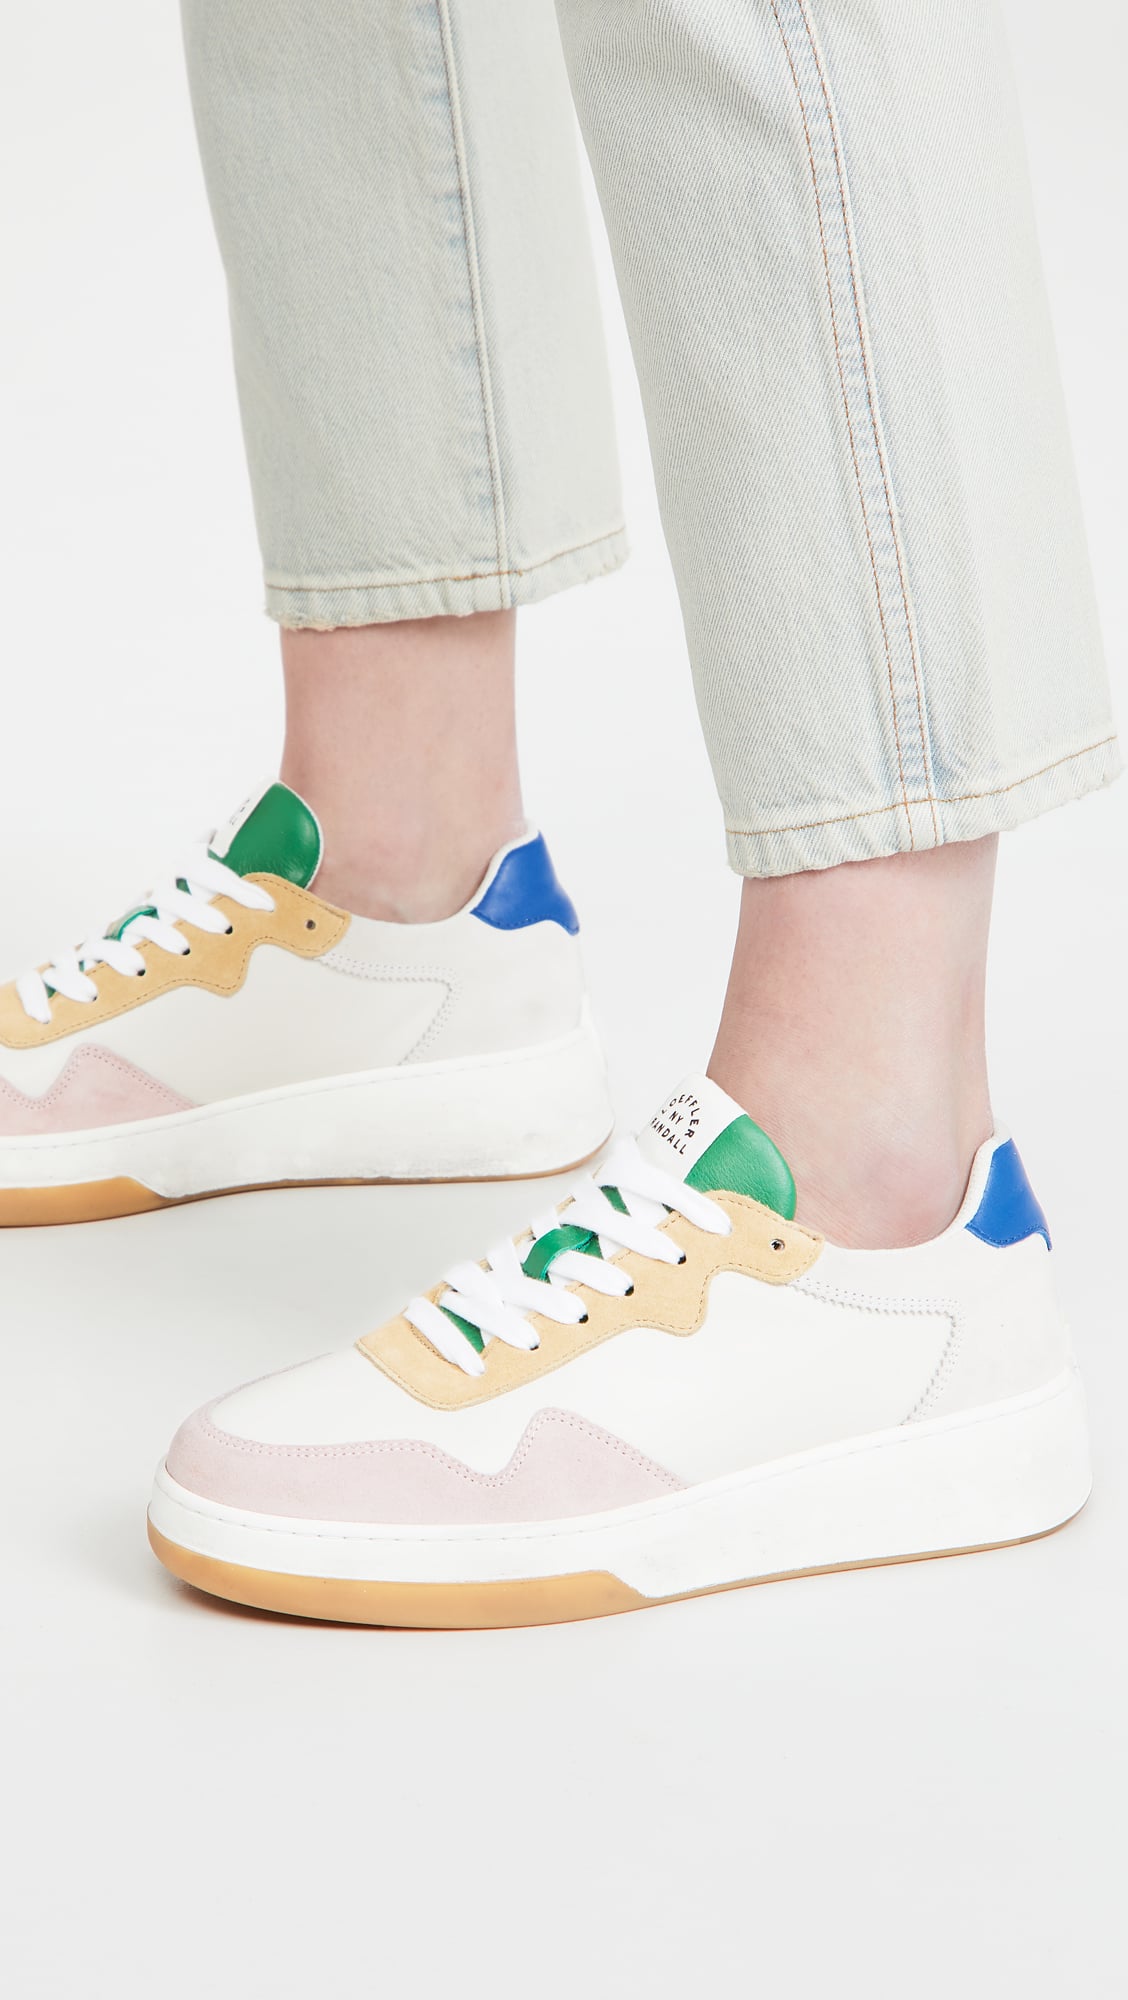 Loeffler Randall Elliot Ric Rac Sneakers | Don't Leave For Summer Holiday  Without 1 of These Cool Sneakers | POPSUGAR Fashion UK Photo 5